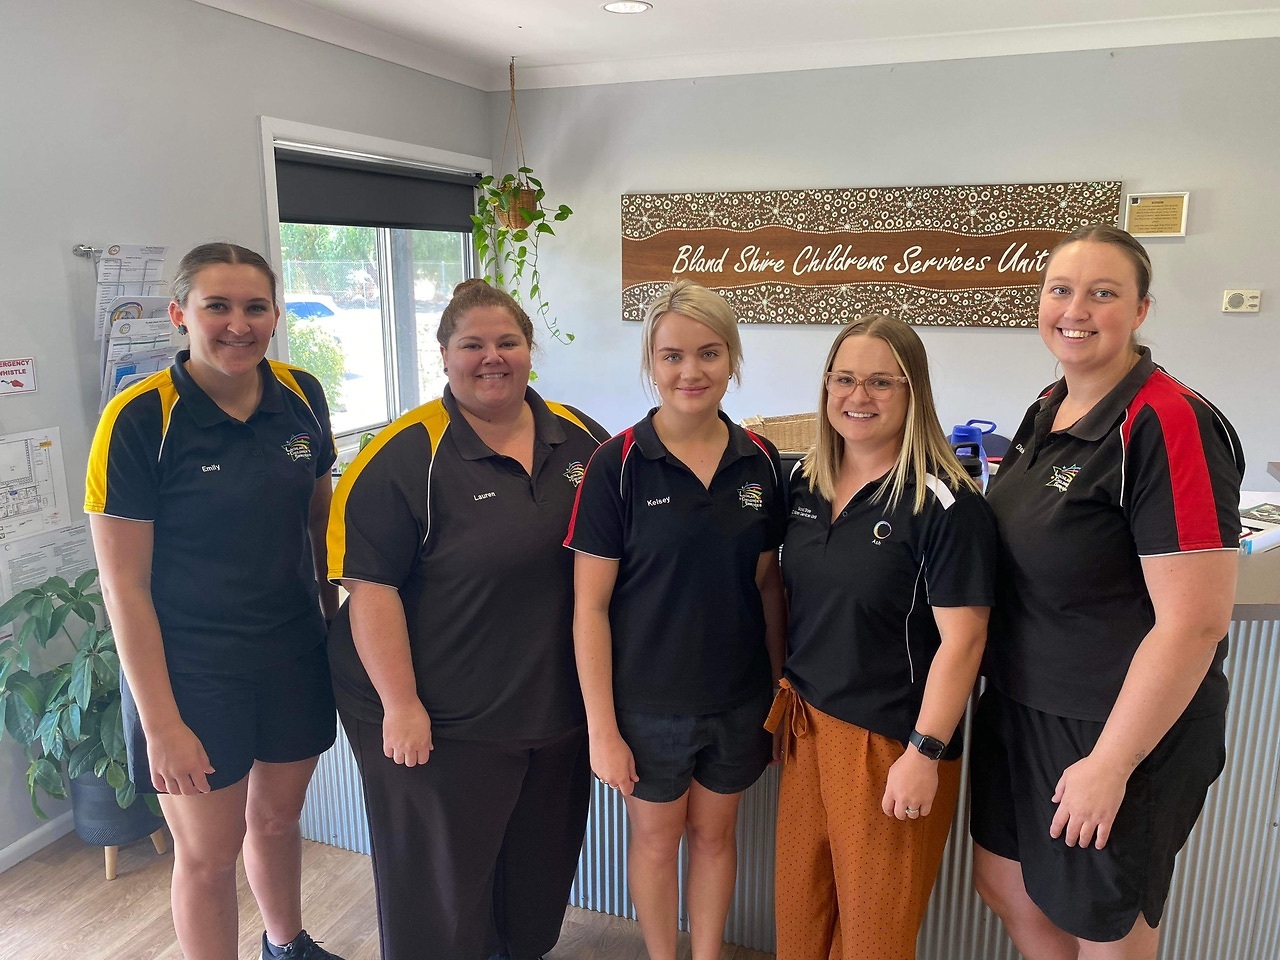 Emily Goodsell, Lauren Krause, Kelsey Ward and Dakota May with Educational Leader Ash Nicholson from the Bland Shire Children Services Unit at West Wyalong. Image Credit: Lachlan Children Services Facebook Page.